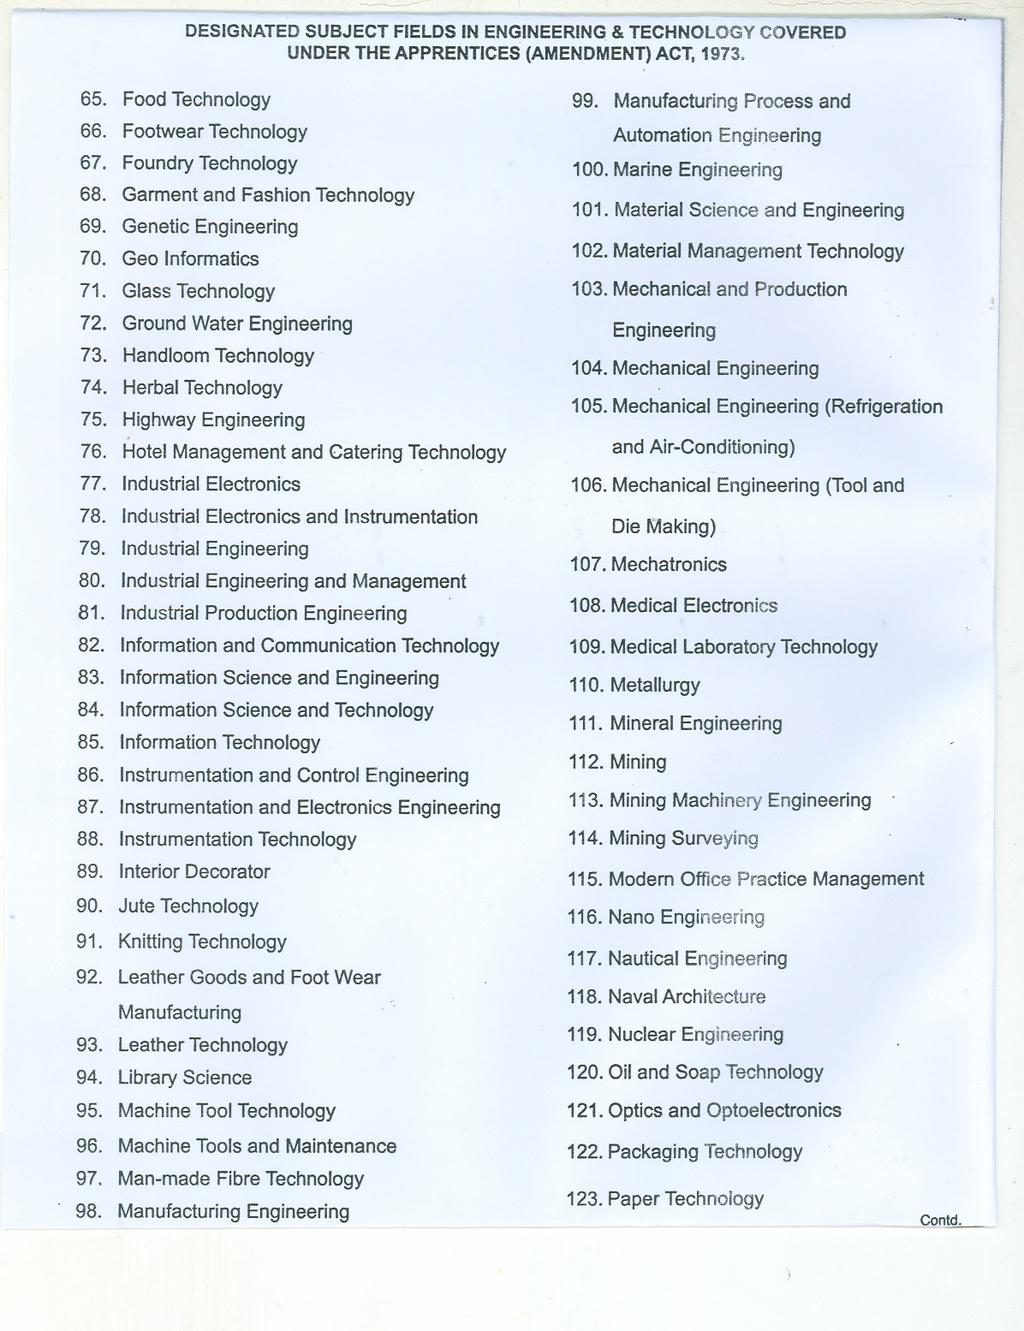 .~ ~---~~~- - --~~-. DESIGNATED SUBJECT FIELDS IN ENGINEERING & TECHNOLOGY COVERED UNDERTHEAPPRENTICES(AMENDMENT)ACT,1973.. ---- 65. Food Technology 66. Footwear Technology 67. Foundry Technology 68.